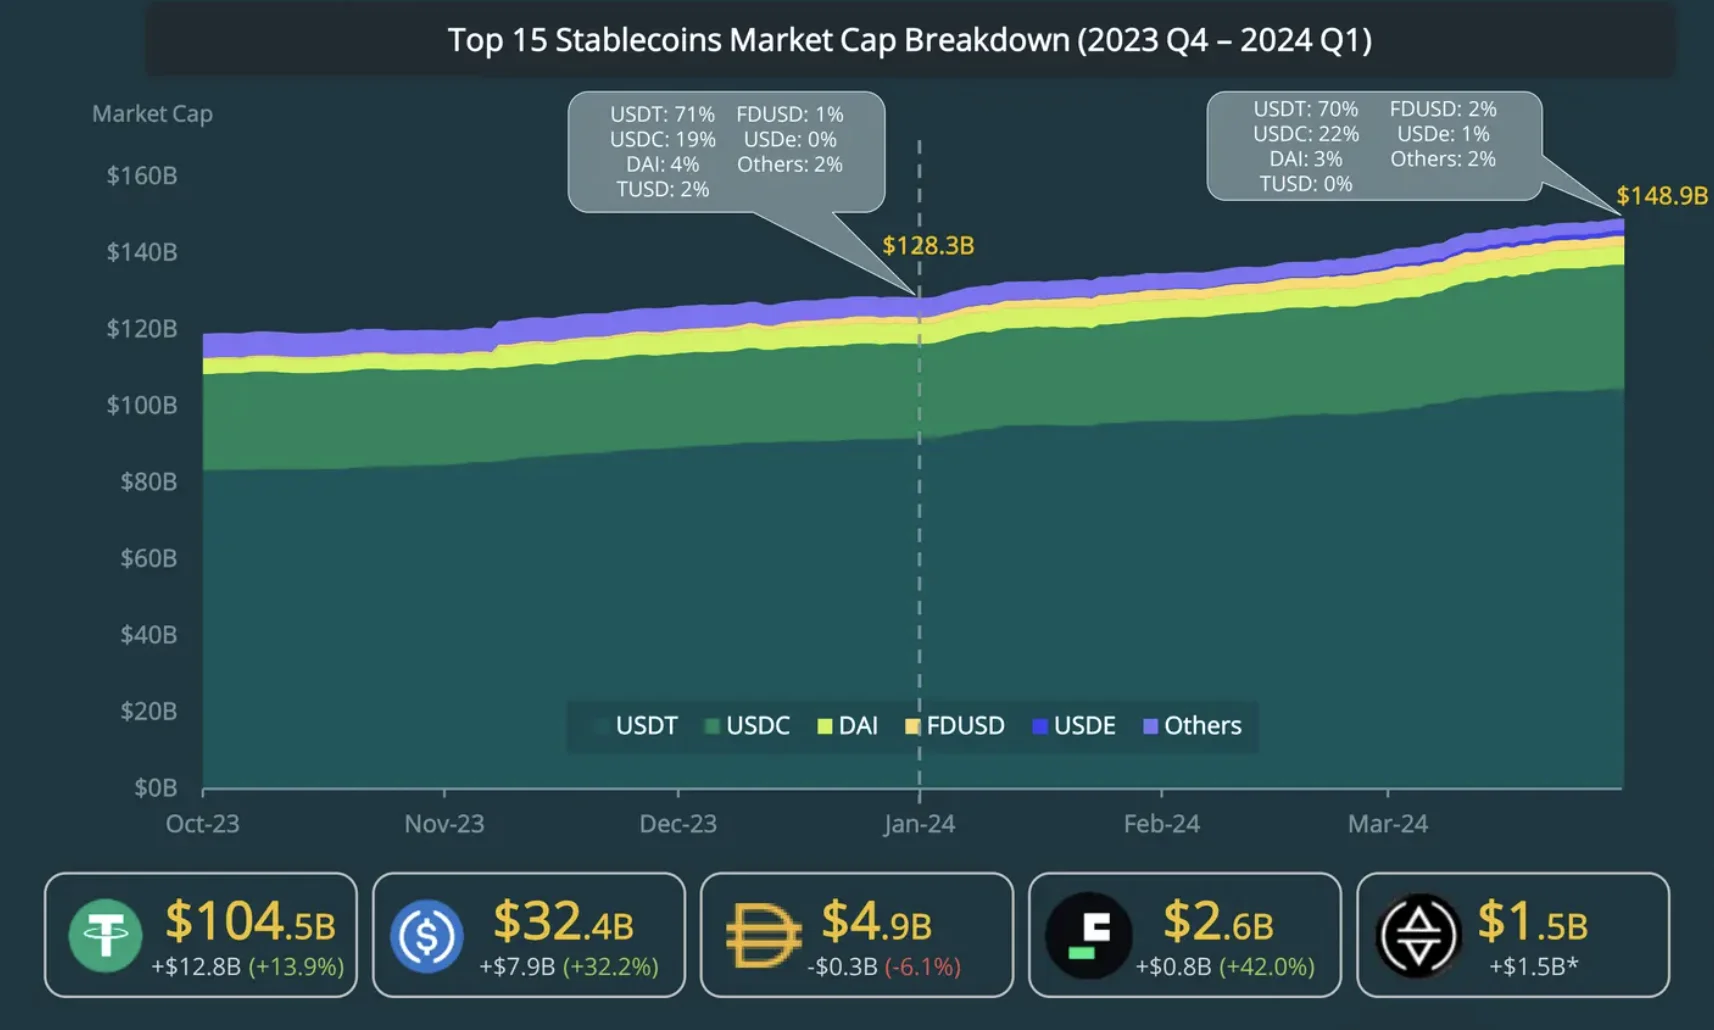 Top 15 Stablecoins of Q1, 2024